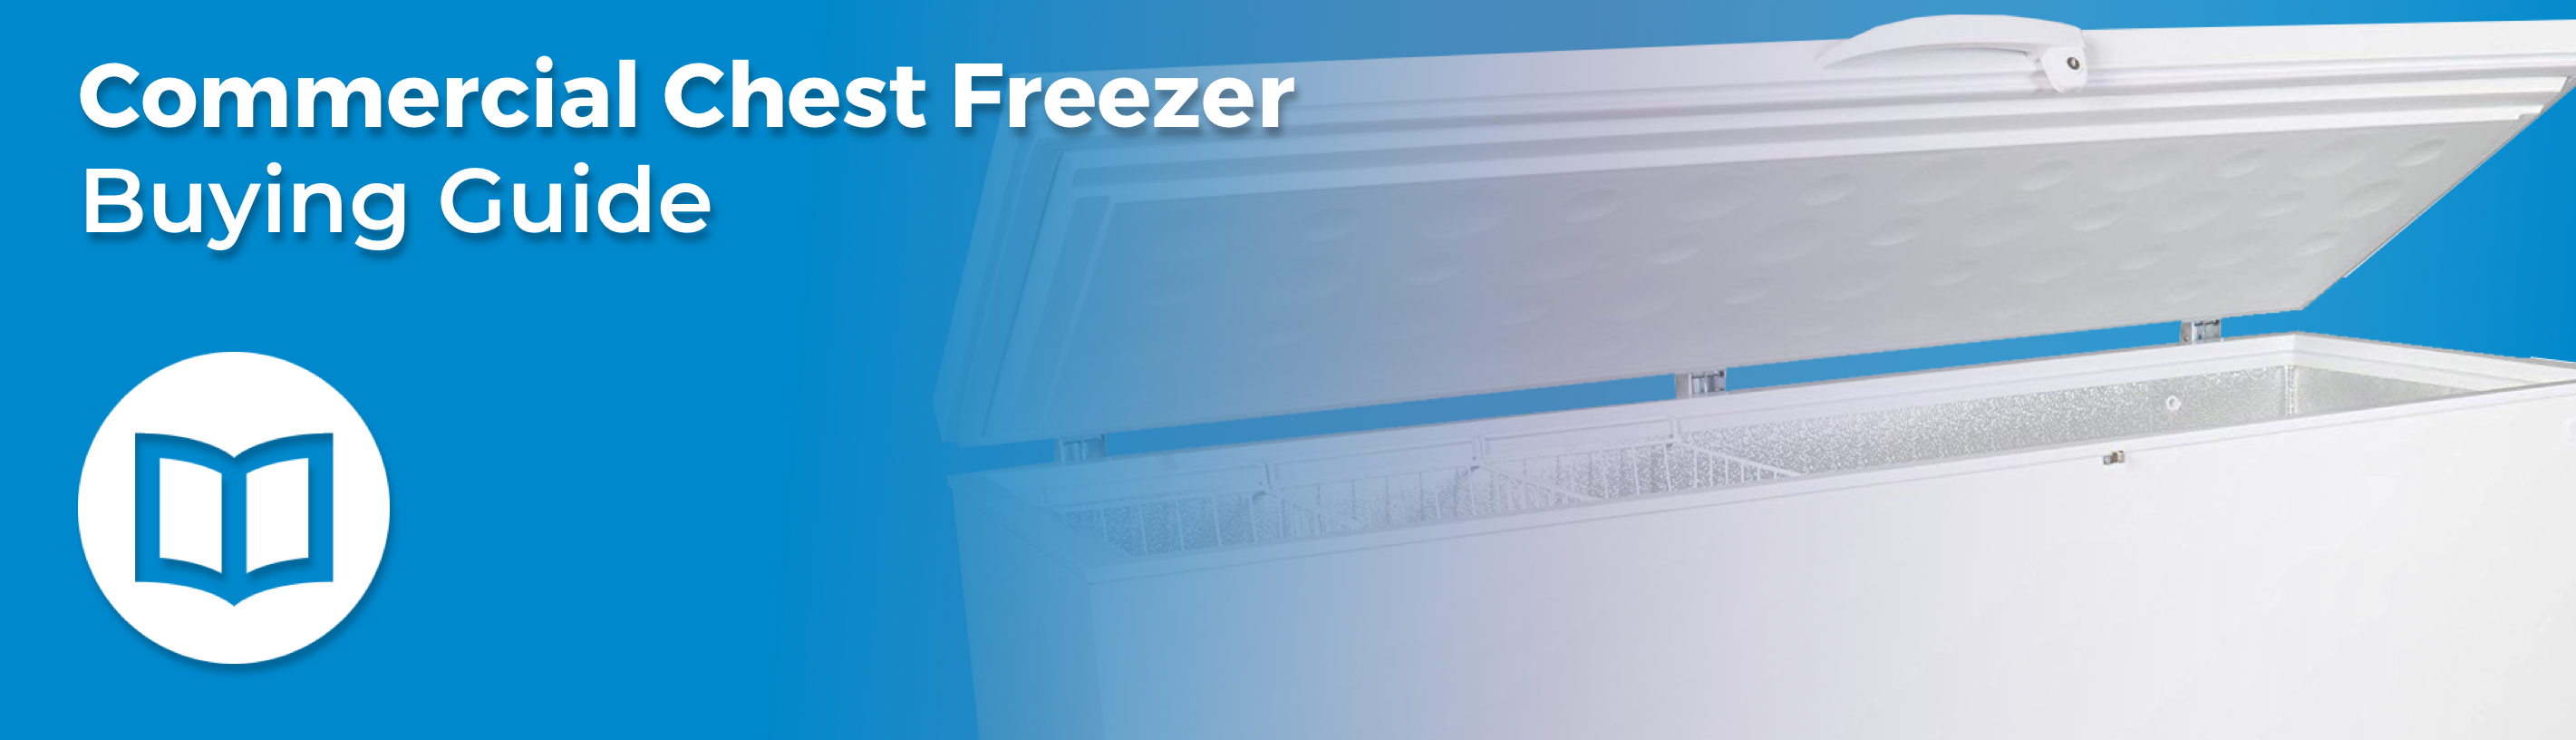 Commercial Chest Freezer Buying Guide